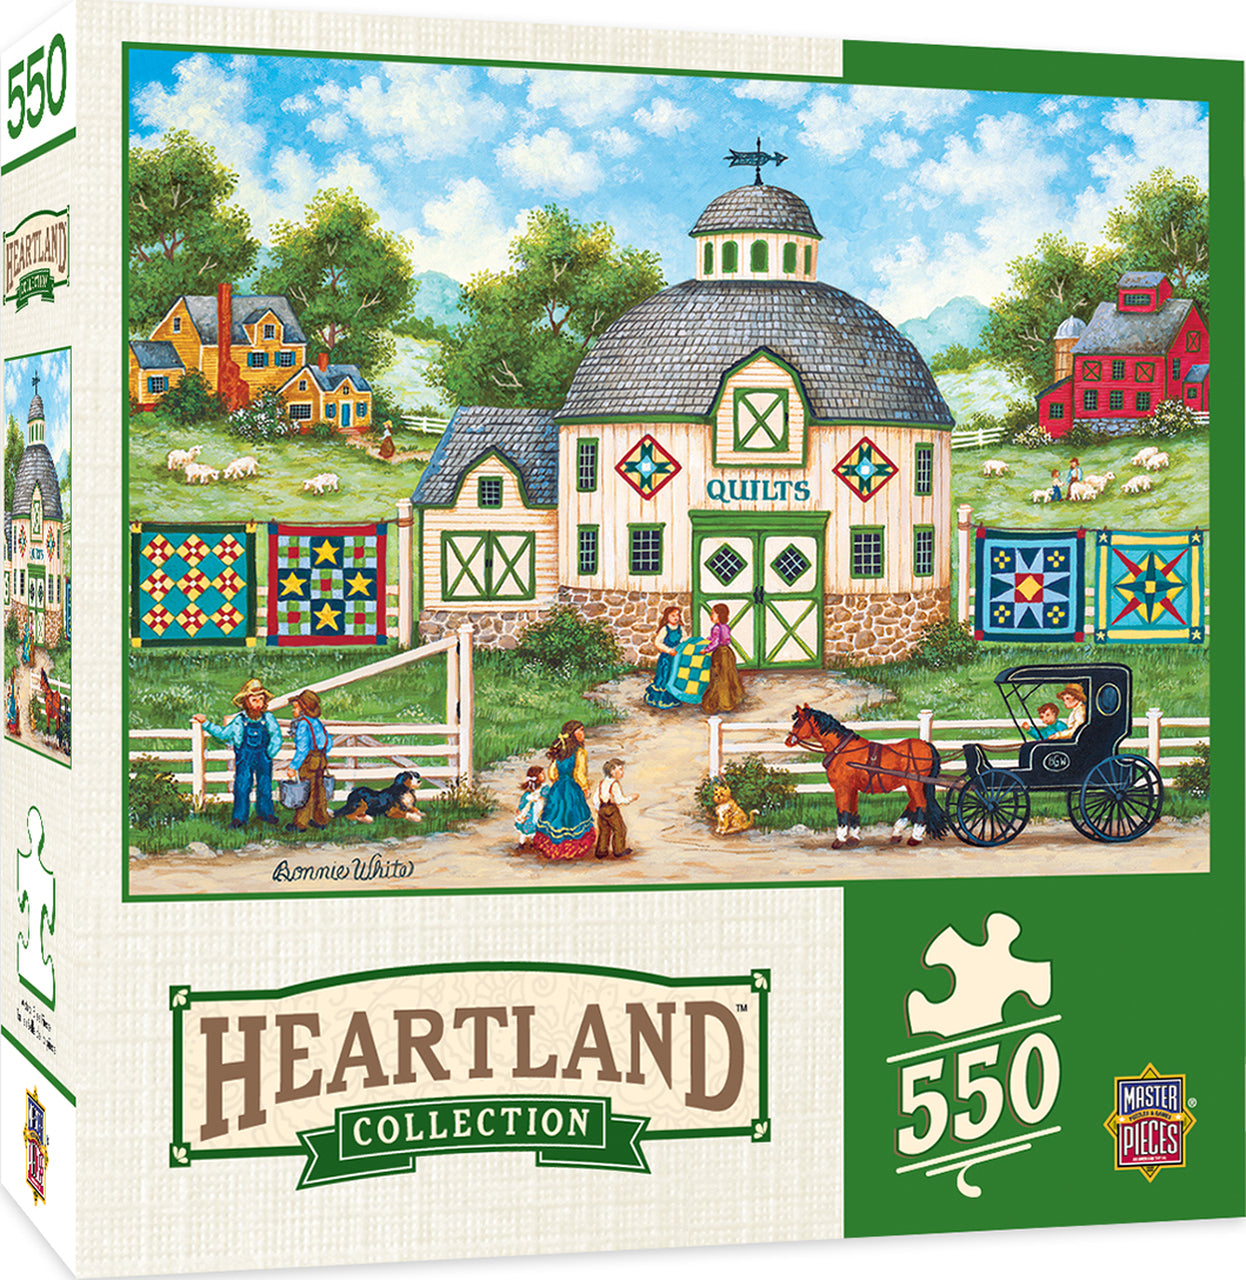 Heartland Collection The Quilt Barn - 550 Piece Jigsaw Puzzle by Masterpieces